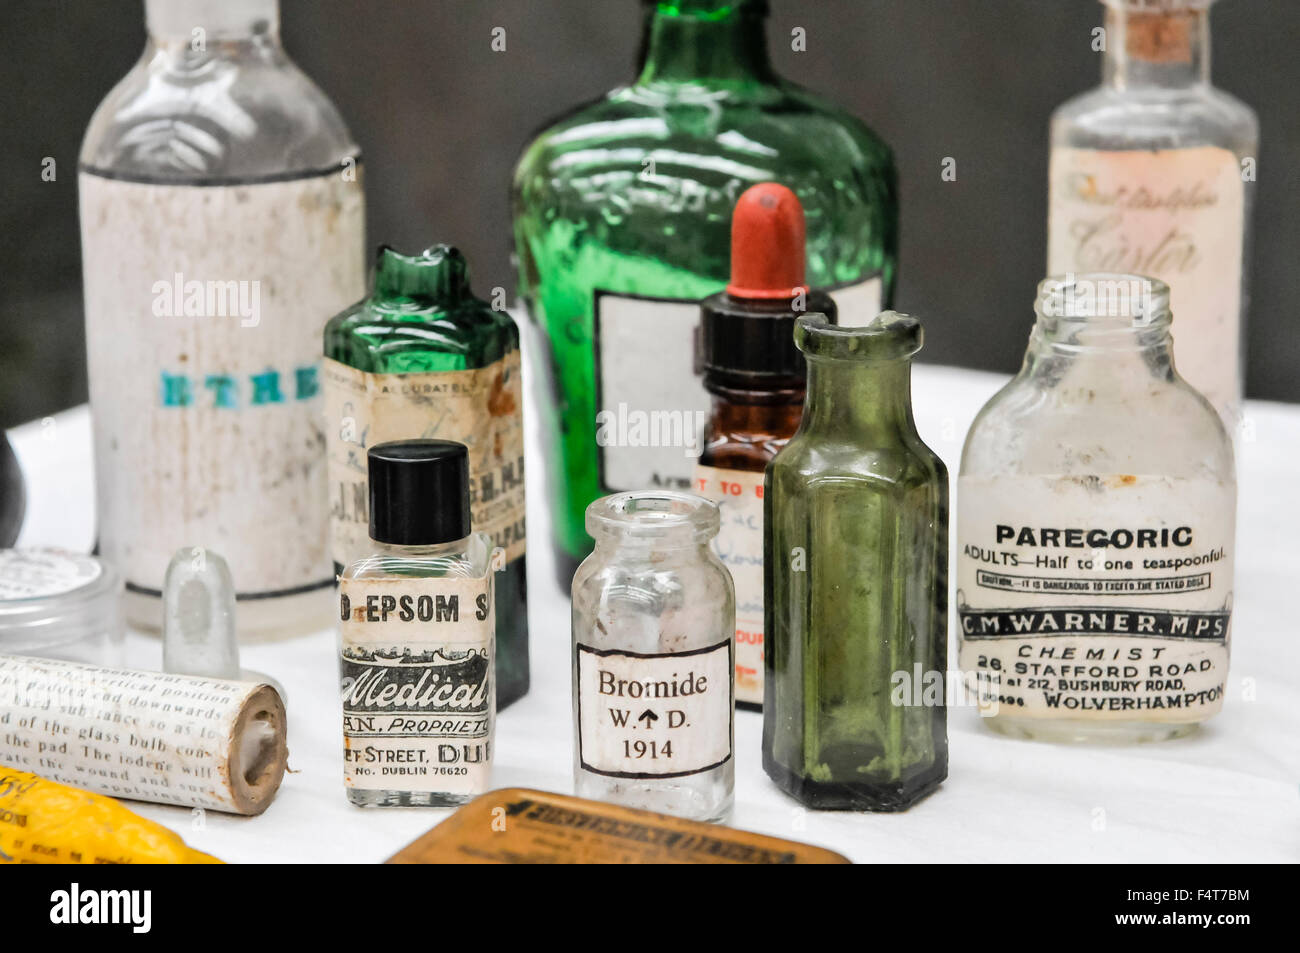 Selection of medicine bottles including Epsom salts, Bromide and Paregoric (an opiate used to treat diarrhoea) from 1914 Stock Photo